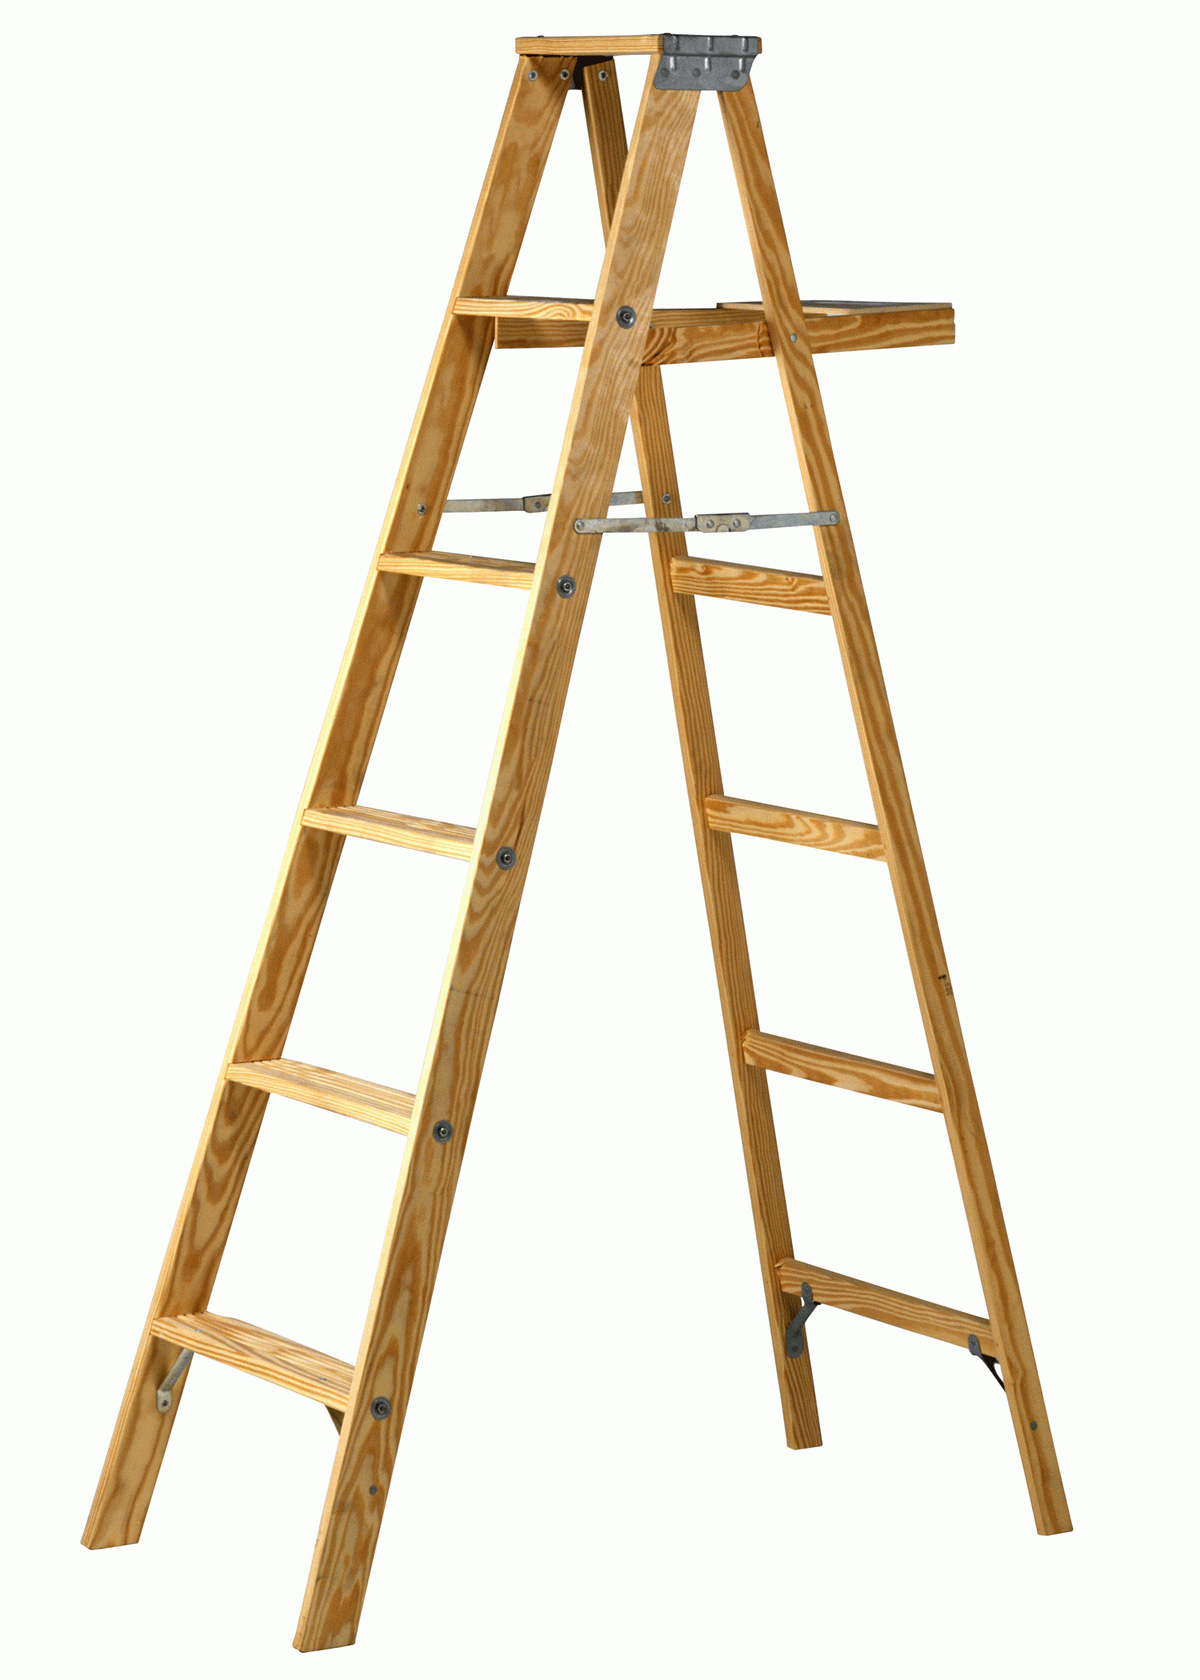 Pictures Of Ladders - ClipArt Best